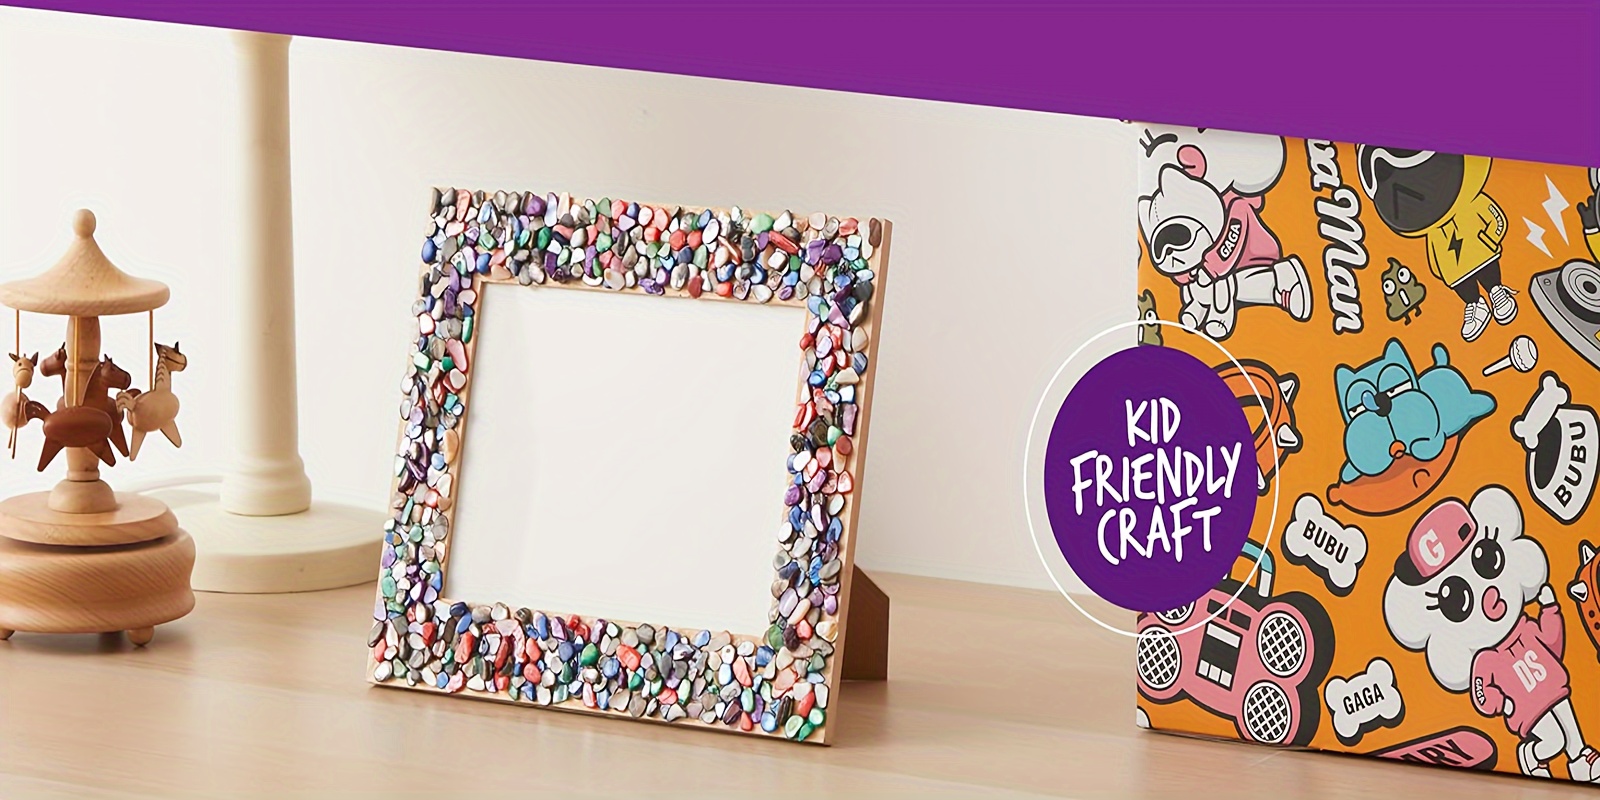  DIY Mosaic Picture Frame Kit for Kids,Arts and Crafts for Kids  Ages Fun DIY Craft Kits for Girls Ages 6-8 Years Old,Arts & Crafts for Kids  & Tweens-Tweens,Gifts of 6-8,8-12,10-12 